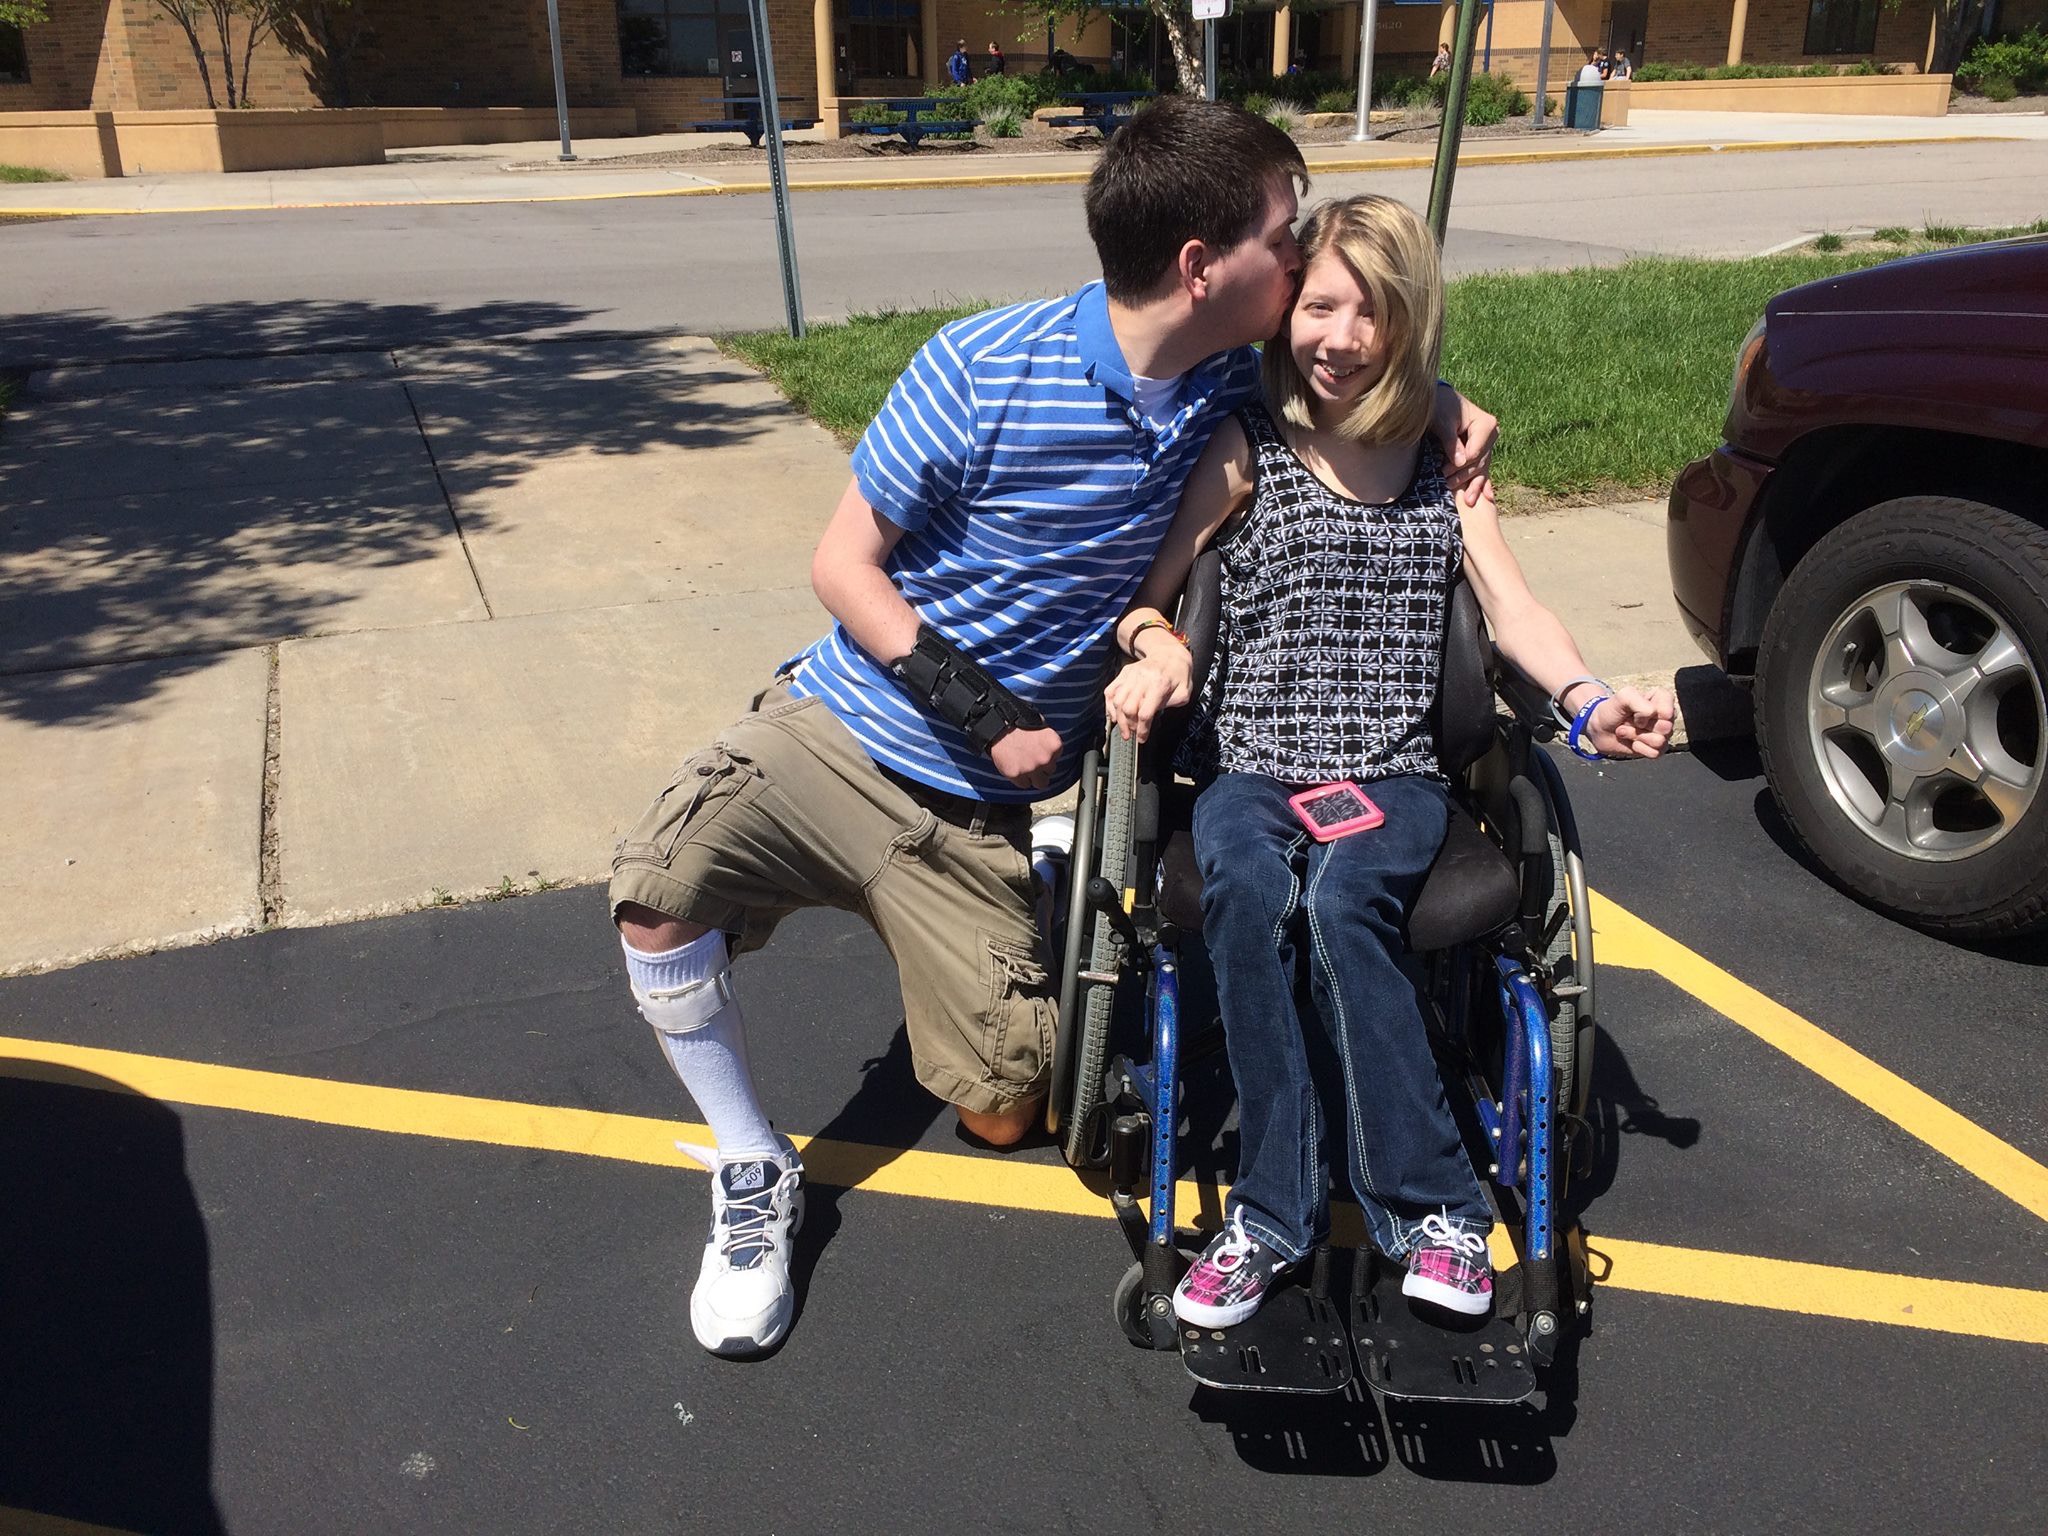 Sarah and Joe in a parking lot. Sarah sits in a wheelchair while Joe is on one knee beside her, kissing her cheek. He wears a leg brace.